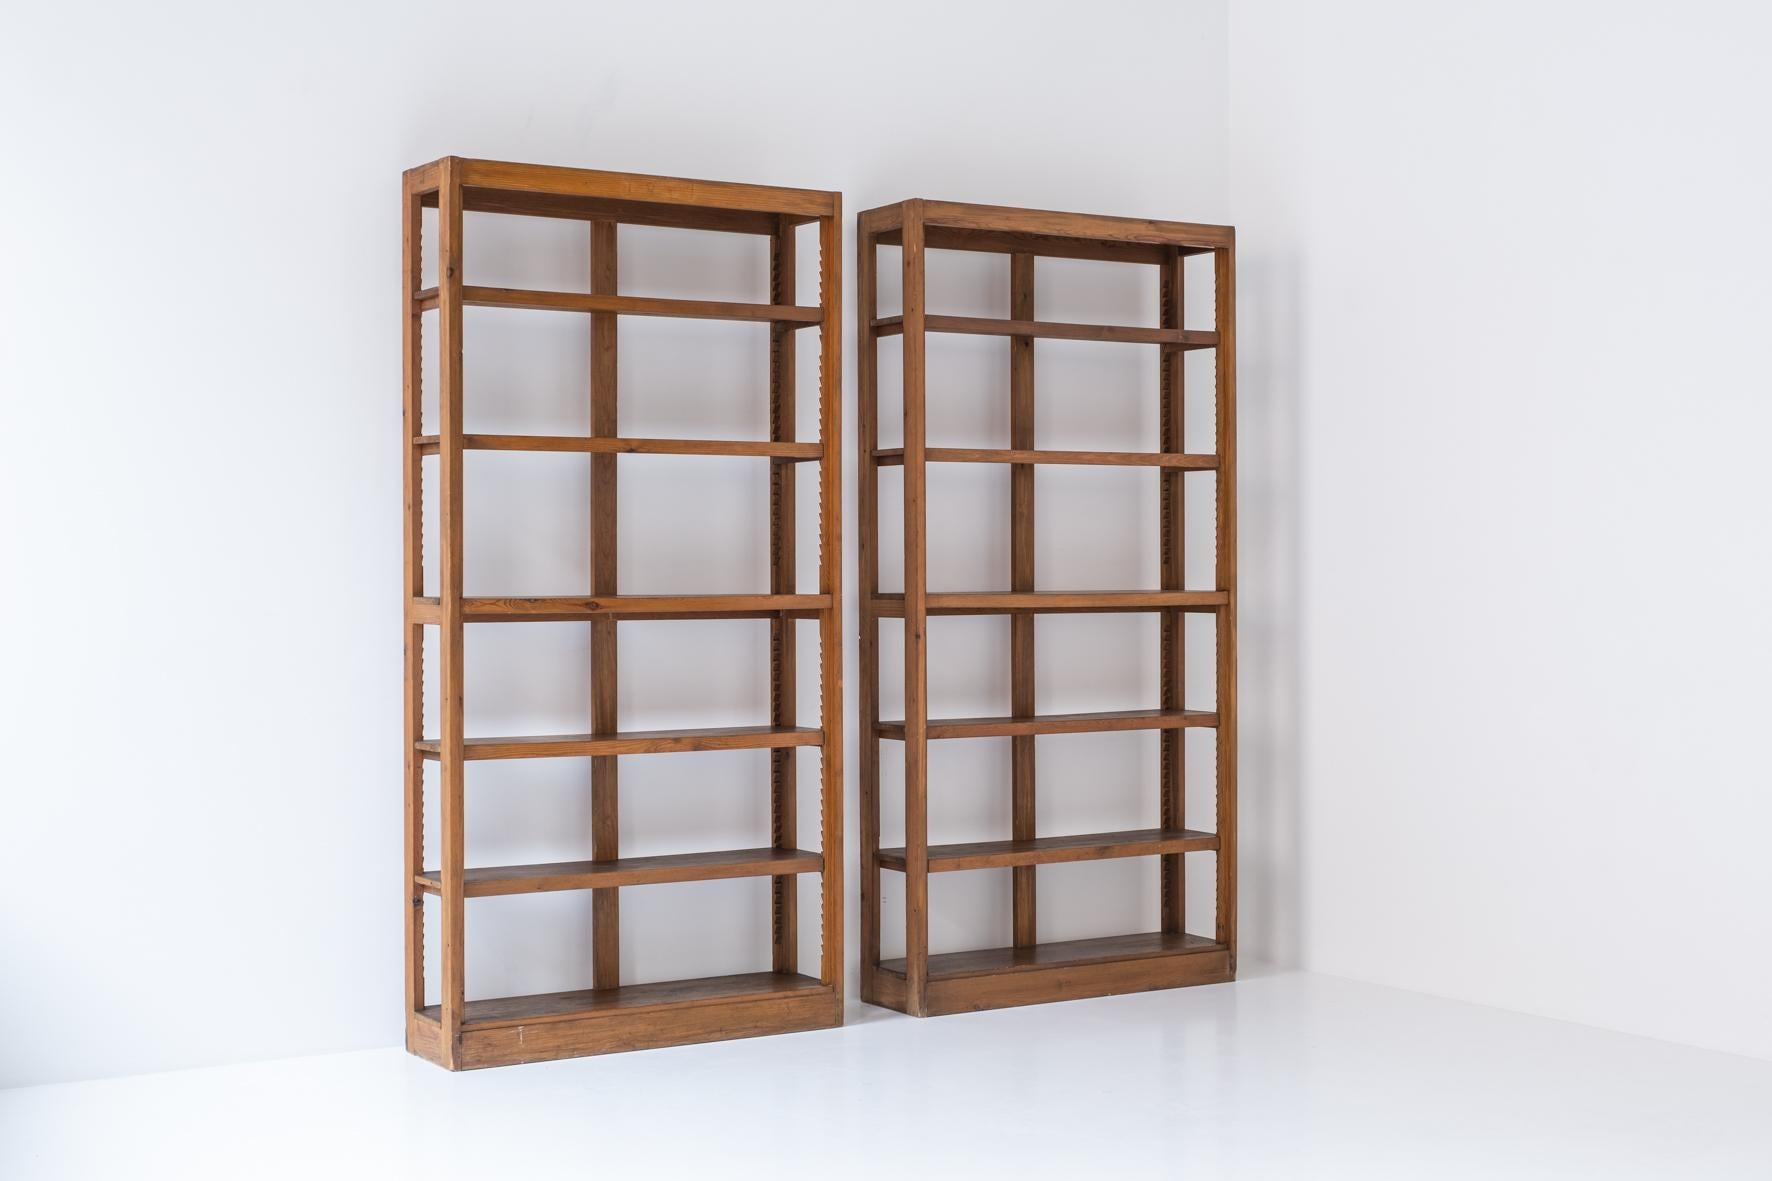 Great pair of minimal bookcases in solid elm from France, designed and produced in the 1950s. This identical pair features series of adjustable shelves and is presented in its original condition with some visible wear from age and use. Due to its